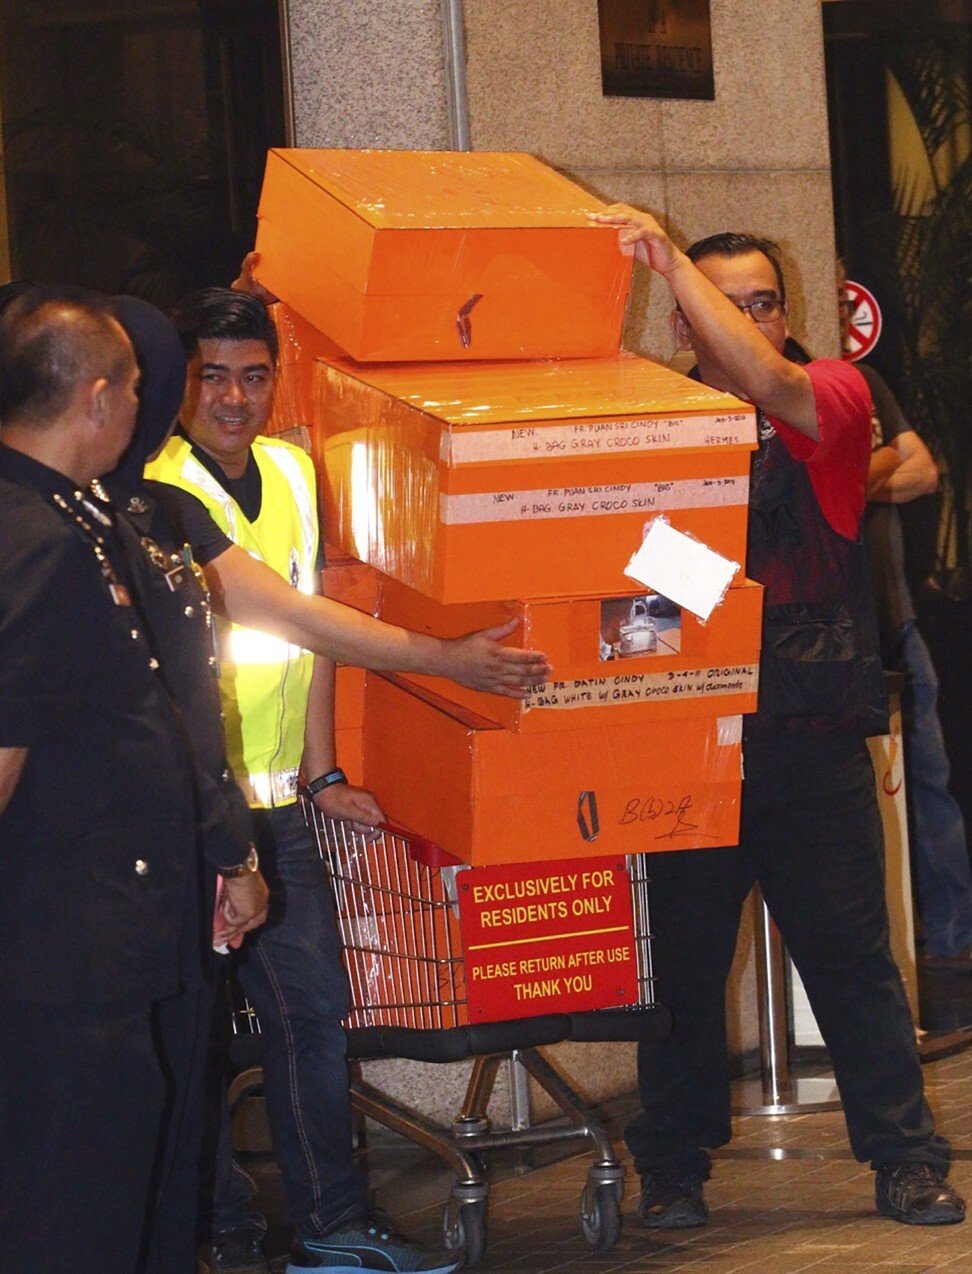 In 2018, police confiscated items after raiding properties linked to Rosmah Mansor and Najib Razak. Photo: AP